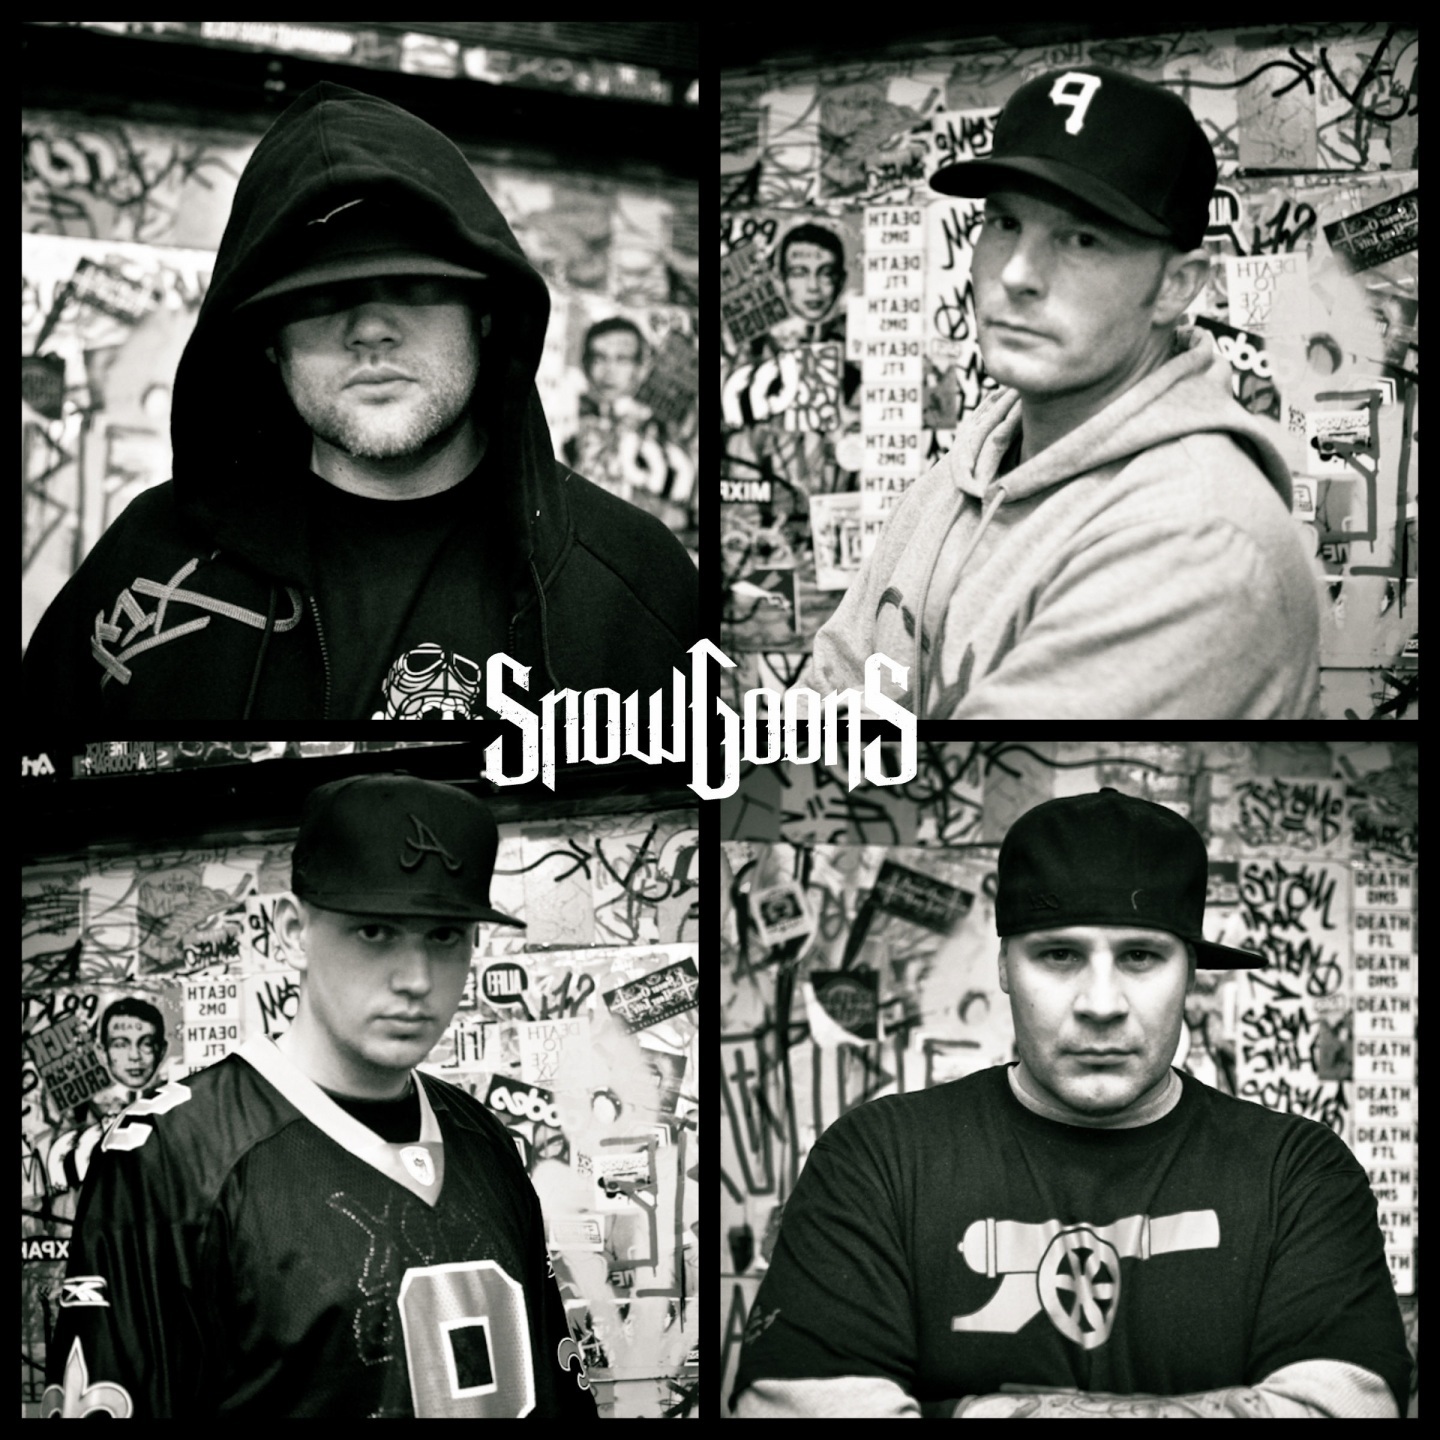 Snowgoons Photo Background Wallpaper Image